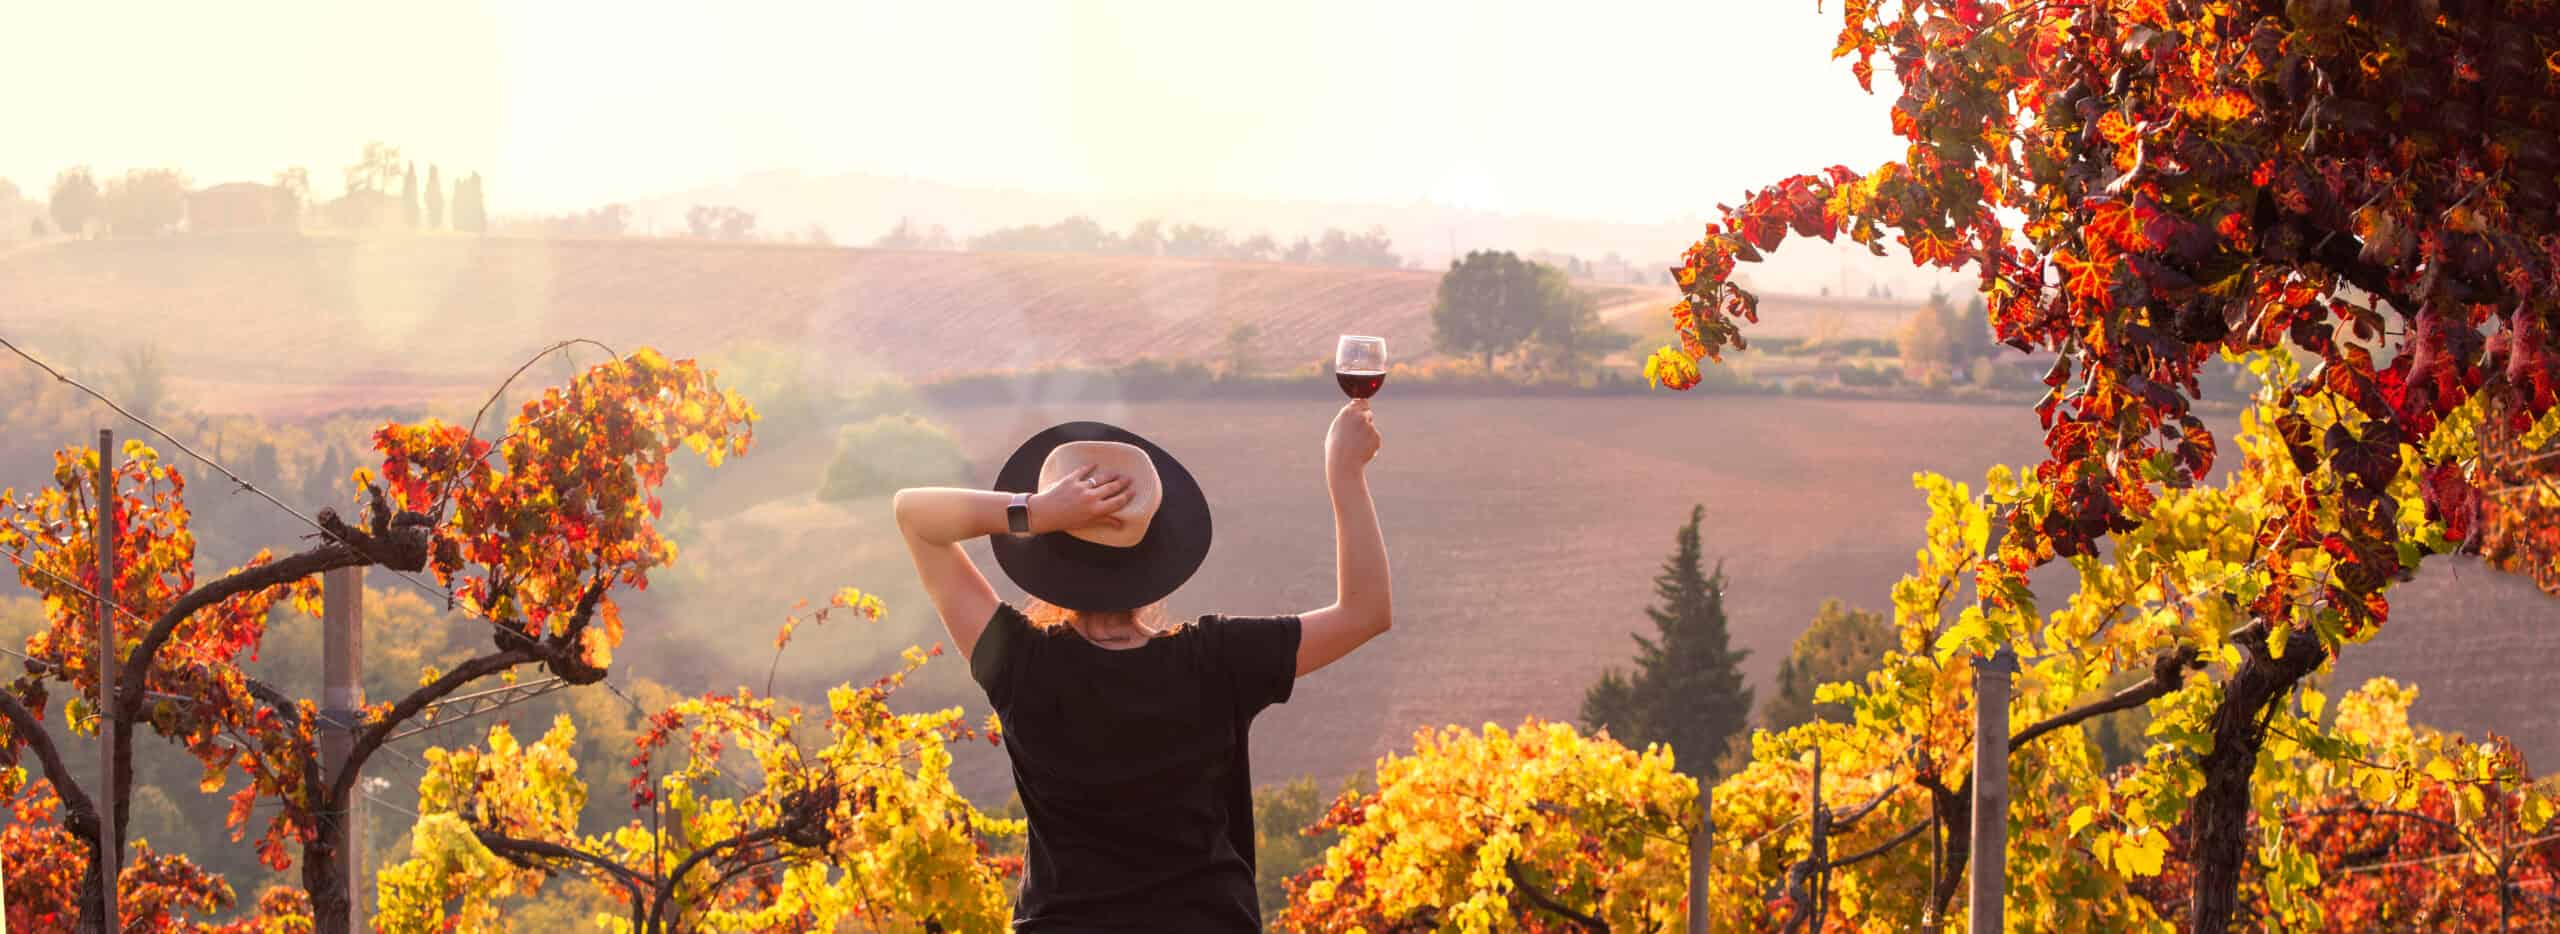 Wine experience in Tuscany